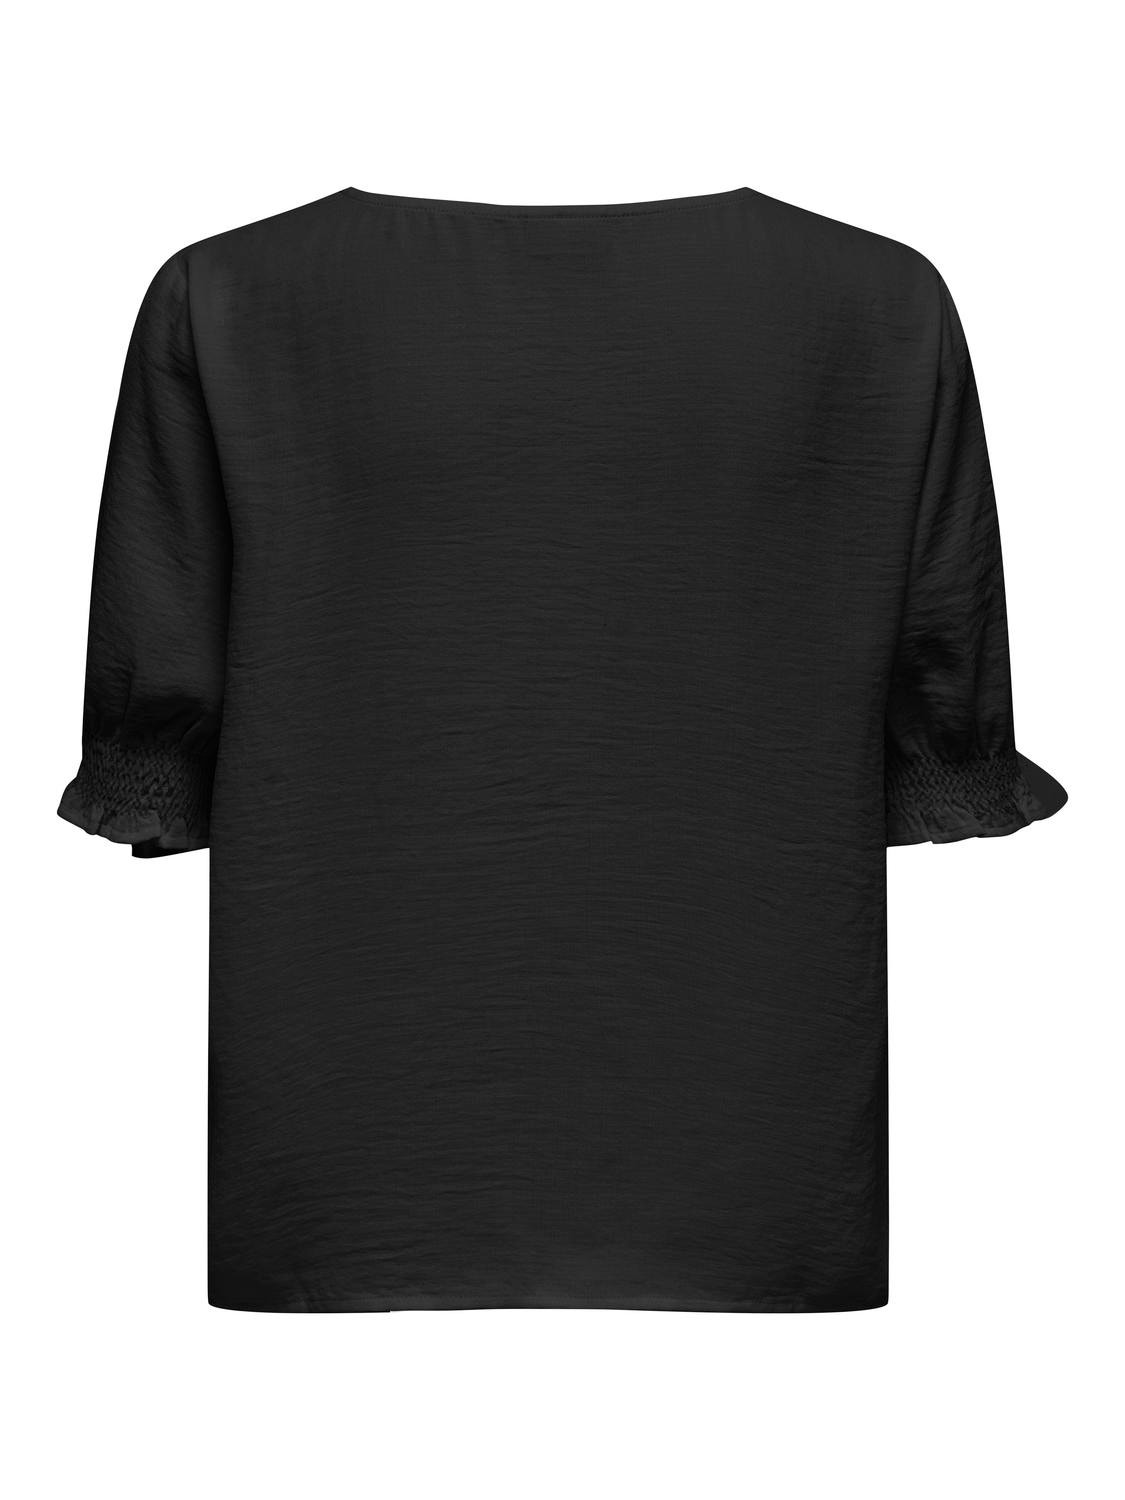 ONLY O-neck top with smock -Black - 15311894